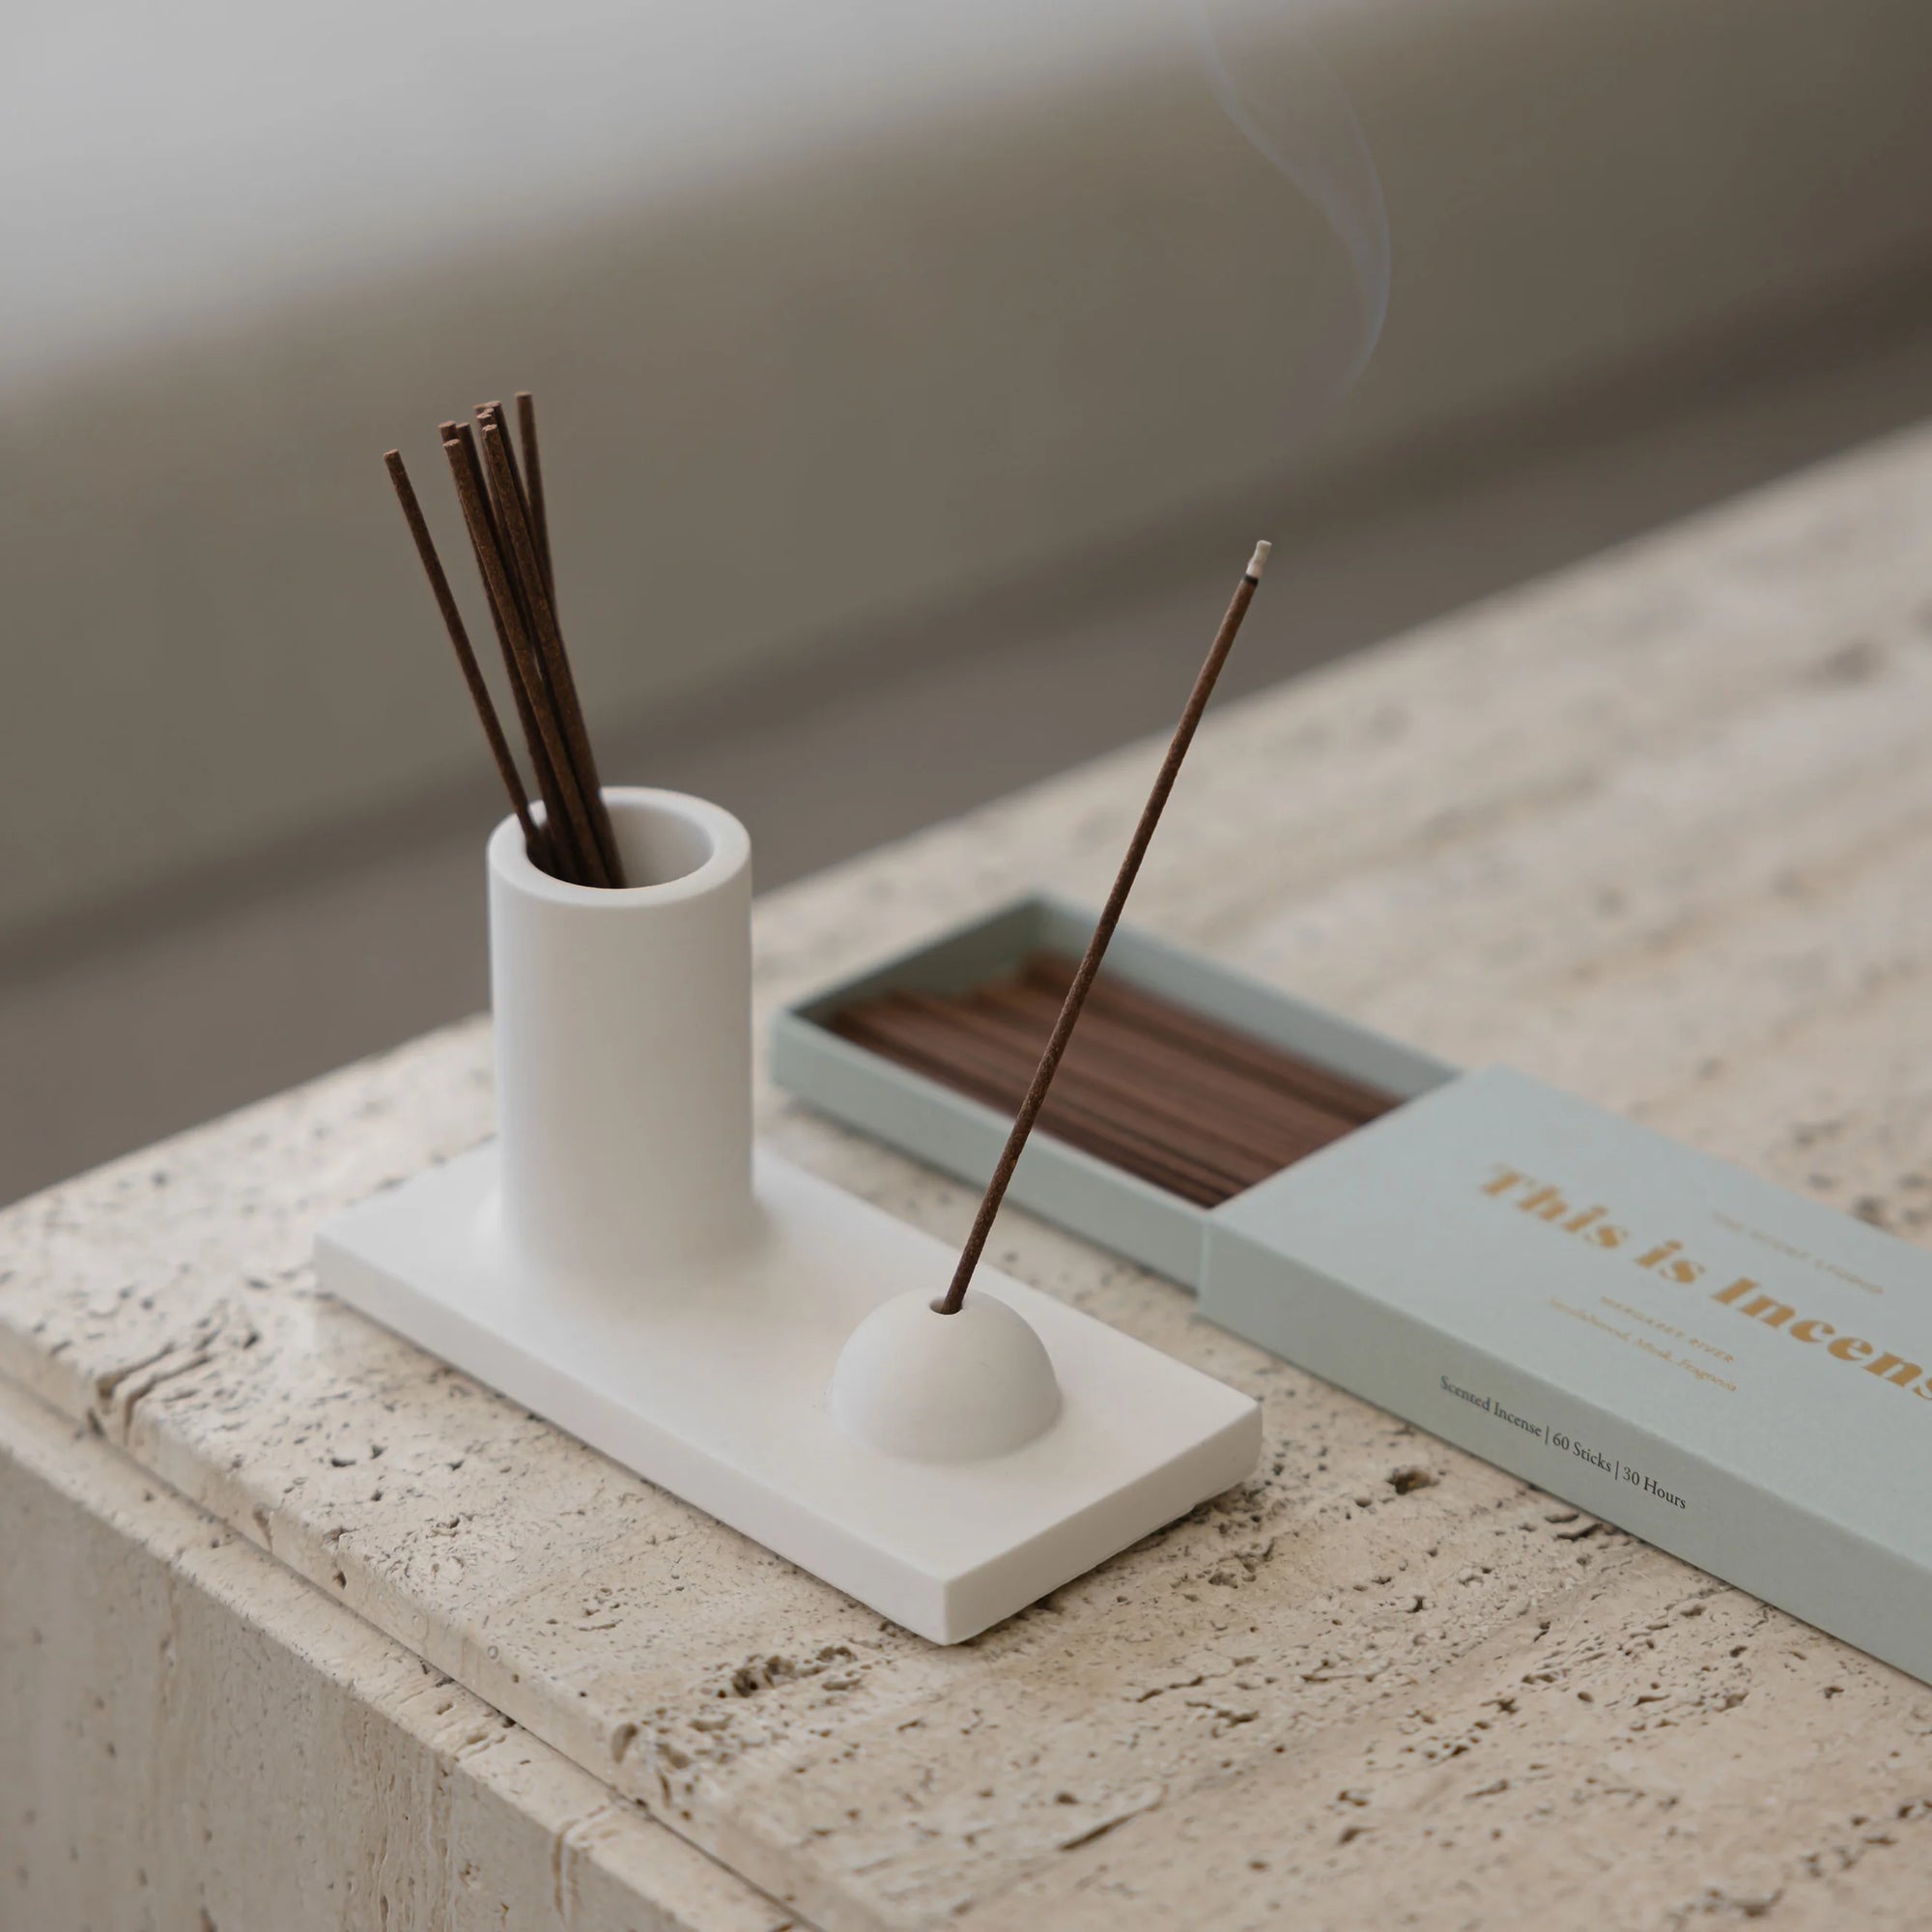 THIS IS INCENSE: MARGARET RIVER